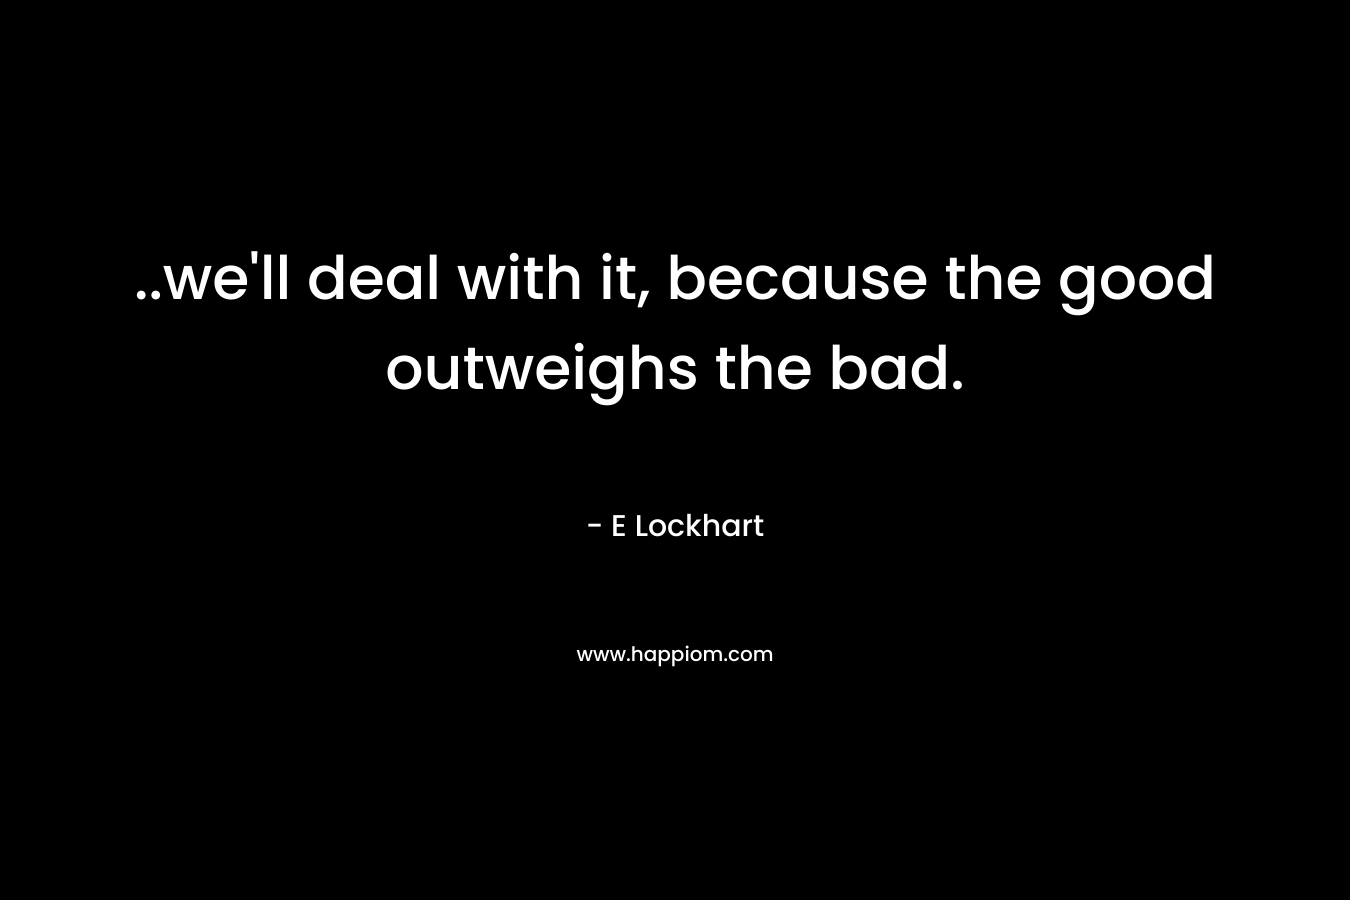 ..we’ll deal with it, because the good outweighs the bad. – E Lockhart